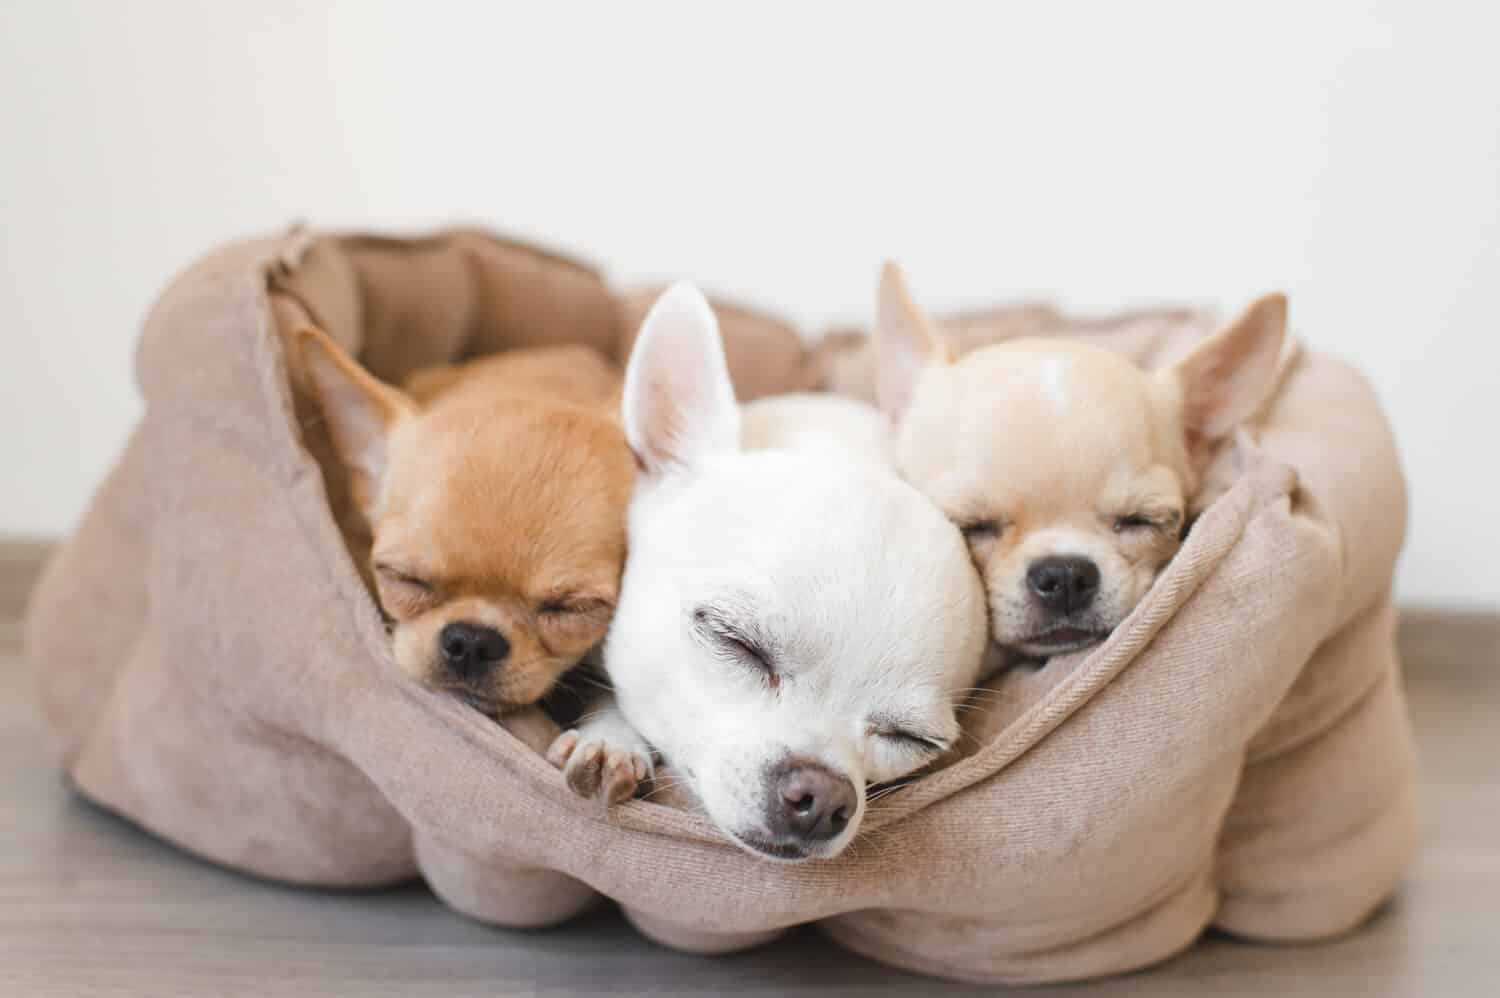 Closeup of three lovely, cute domestic breed mammal chihuahua puppies friends lying, relaxing in dog bed. Pets resting, sleeping together. Pathetic and emotional portrait. Dog ears, eyes and facesÃ¾